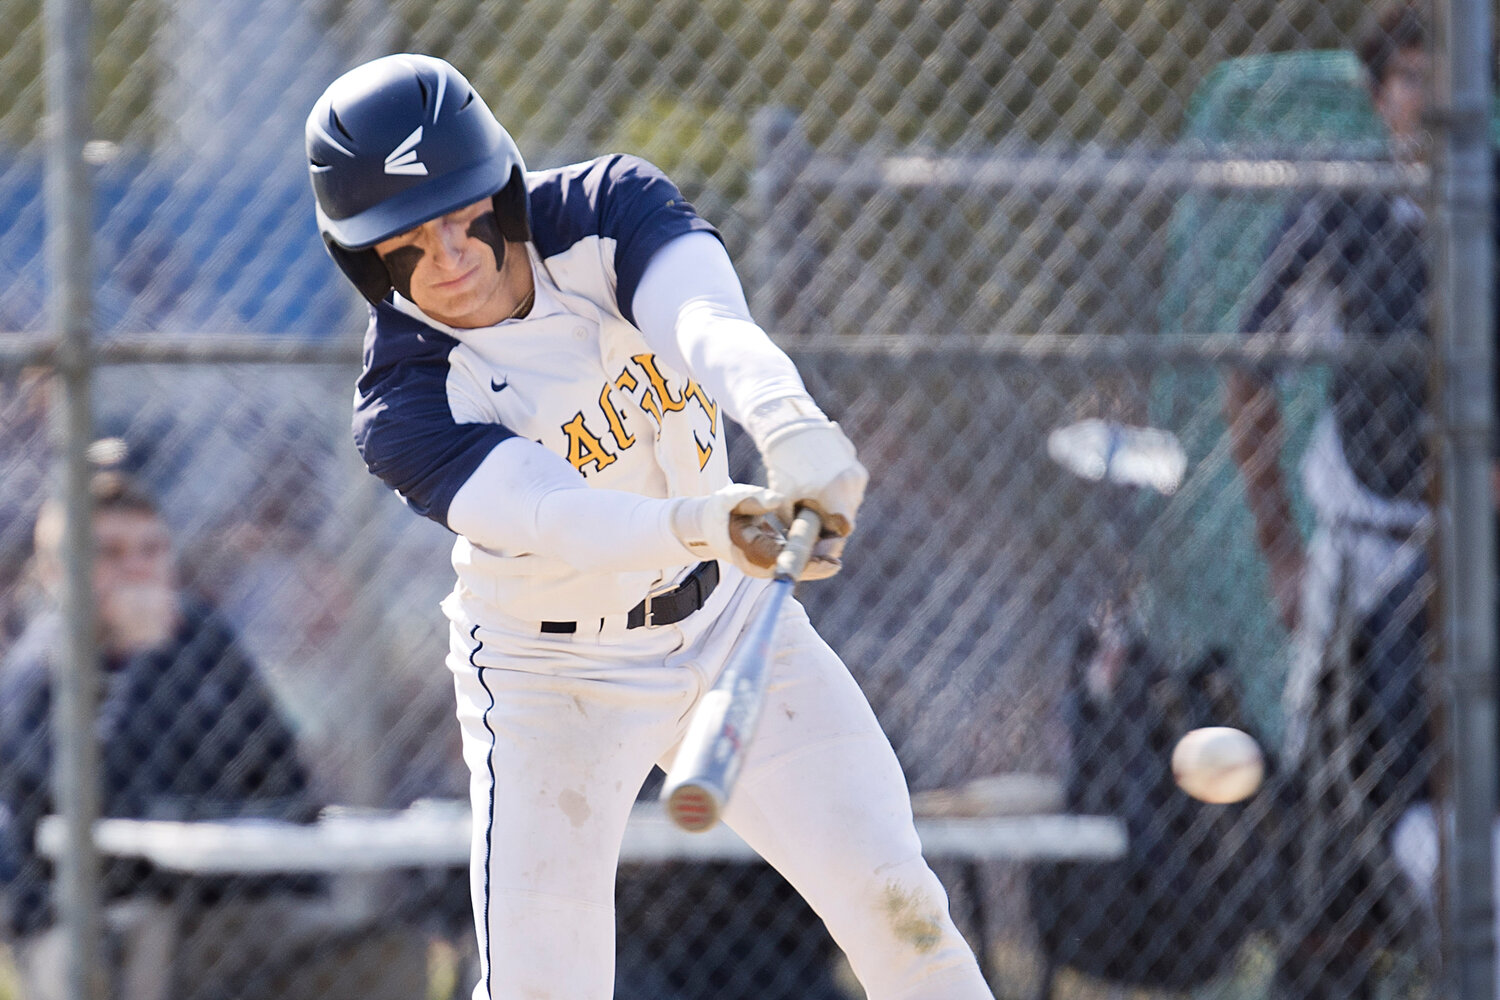 Trevor Snow sends the ball into play while competing against Mount St. Charles, Thursday.